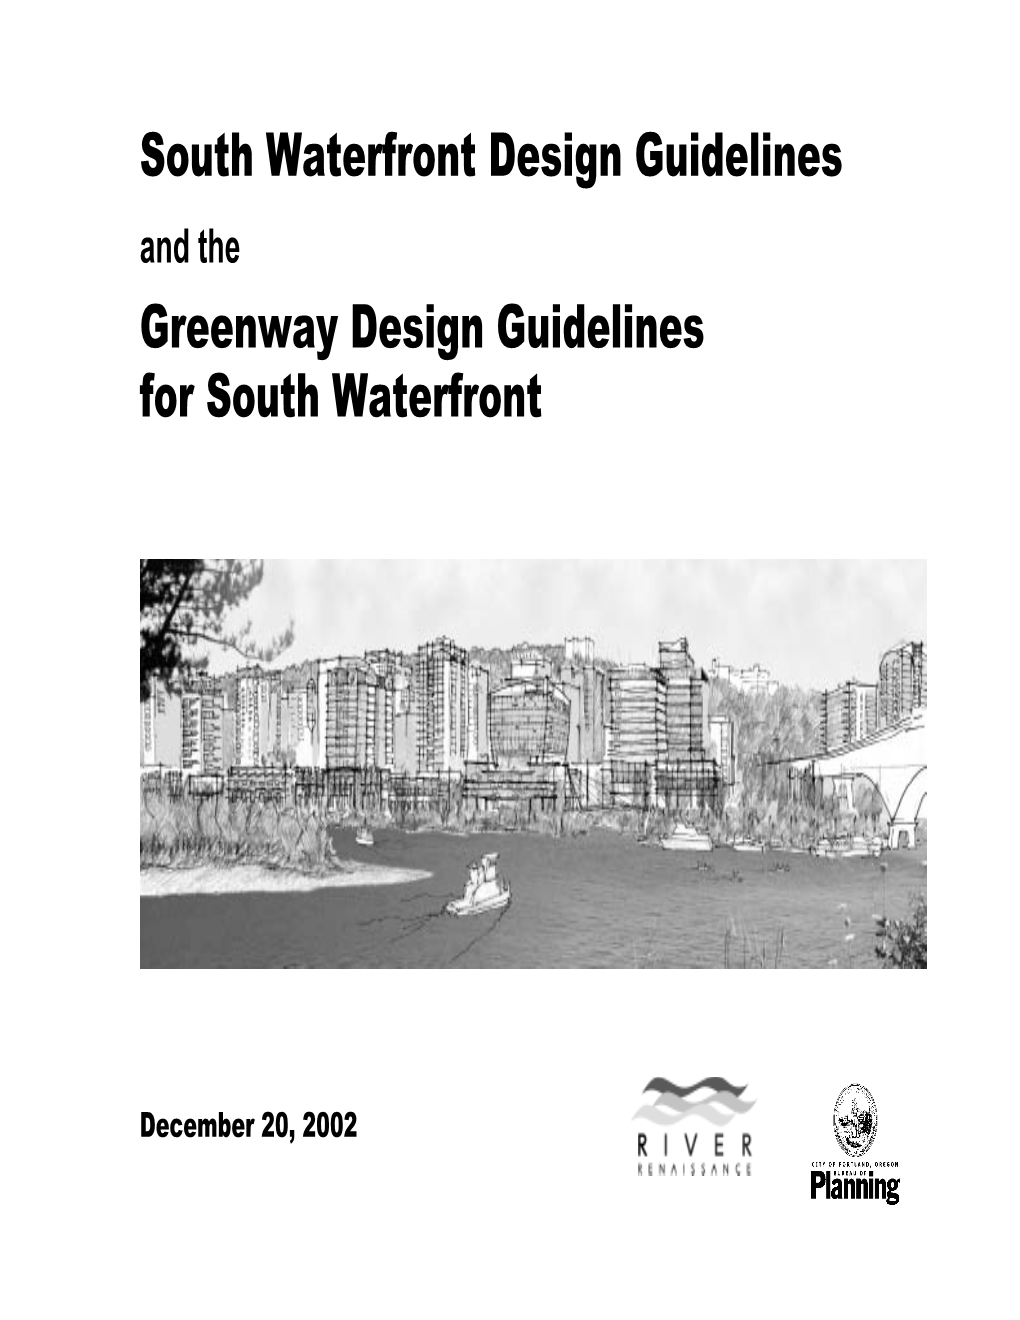 Design Guidelines in South Waterfront